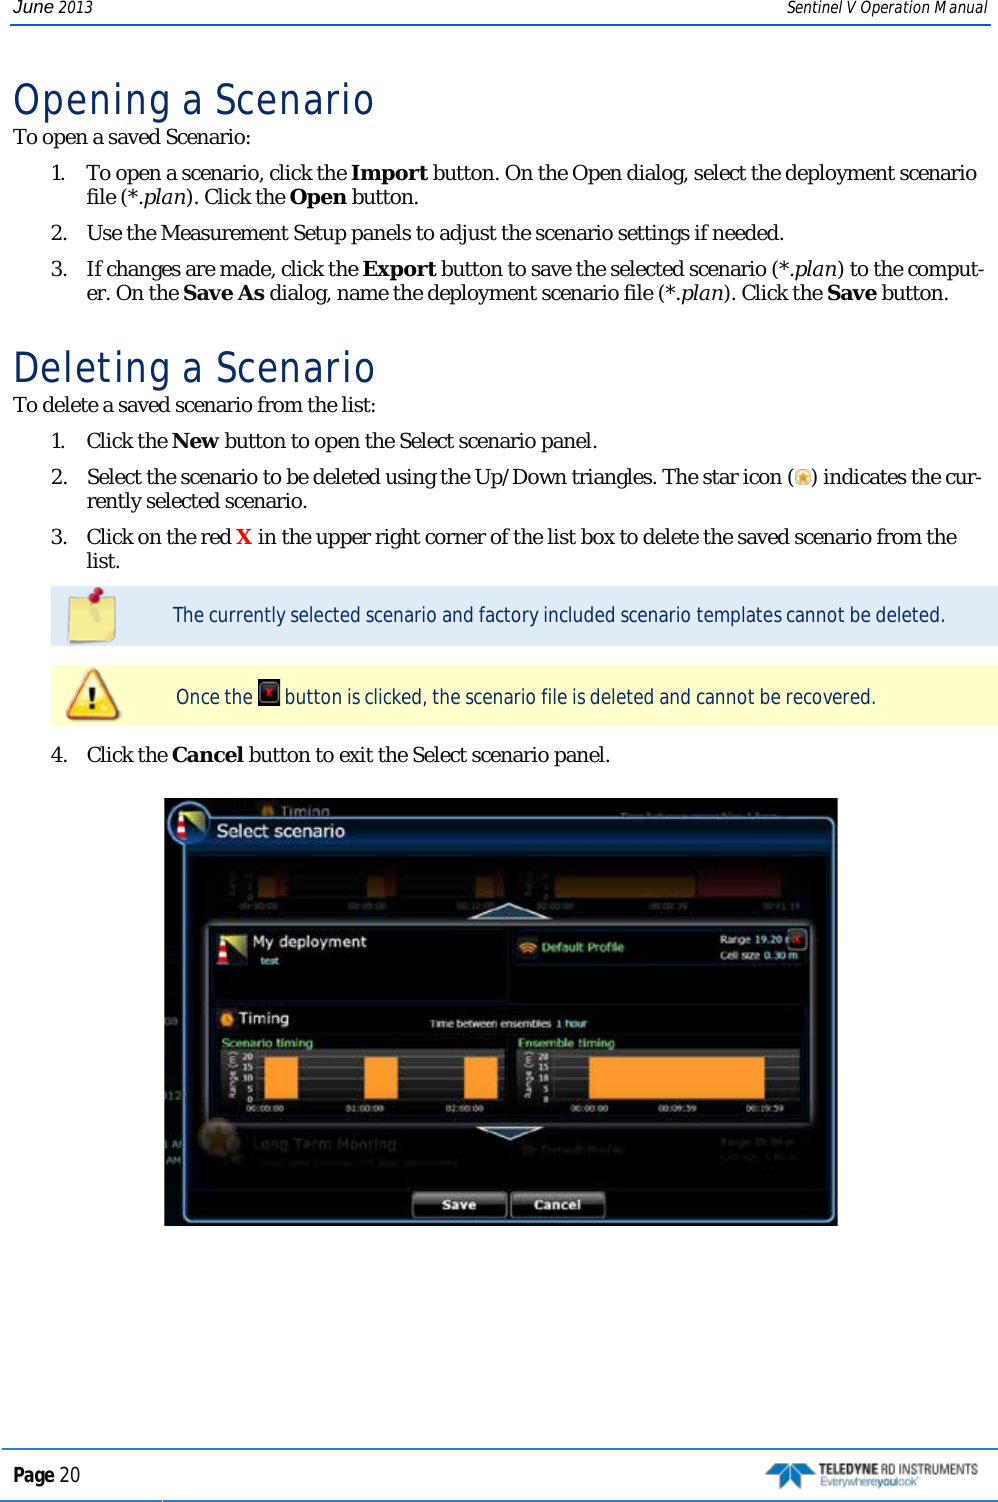 June 2013 Sentinel V Operation Manual Opening a Scenario To open a saved Scenario:  1.  To open a scenario, click the Import button. On the Open dialog, select the deployment scenario file (*.plan). Click the Open button. 2.  Use the Measurement Setup panels to adjust the scenario settings if needed. 3.  If changes are made, click the Export button to save the selected scenario (*.plan) to the comput-er. On the Save As dialog, name the deployment scenario file (*.plan). Click the Save button. Deleting a Scenario To delete a saved scenario from the list:  1.  Click the New button to open the Select scenario panel.  2.  Select the scenario to be deleted using the Up/Down triangles. The star icon () indicates the cur-rently selected scenario.  3.  Click on the red X in the upper right corner of the list box to delete the saved scenario from the list.   The currently selected scenario and factory included scenario templates cannot be deleted.   Once the   button is clicked, the scenario file is deleted and cannot be recovered.   4.  Click the Cancel button to exit the Select scenario panel.   Page 20   